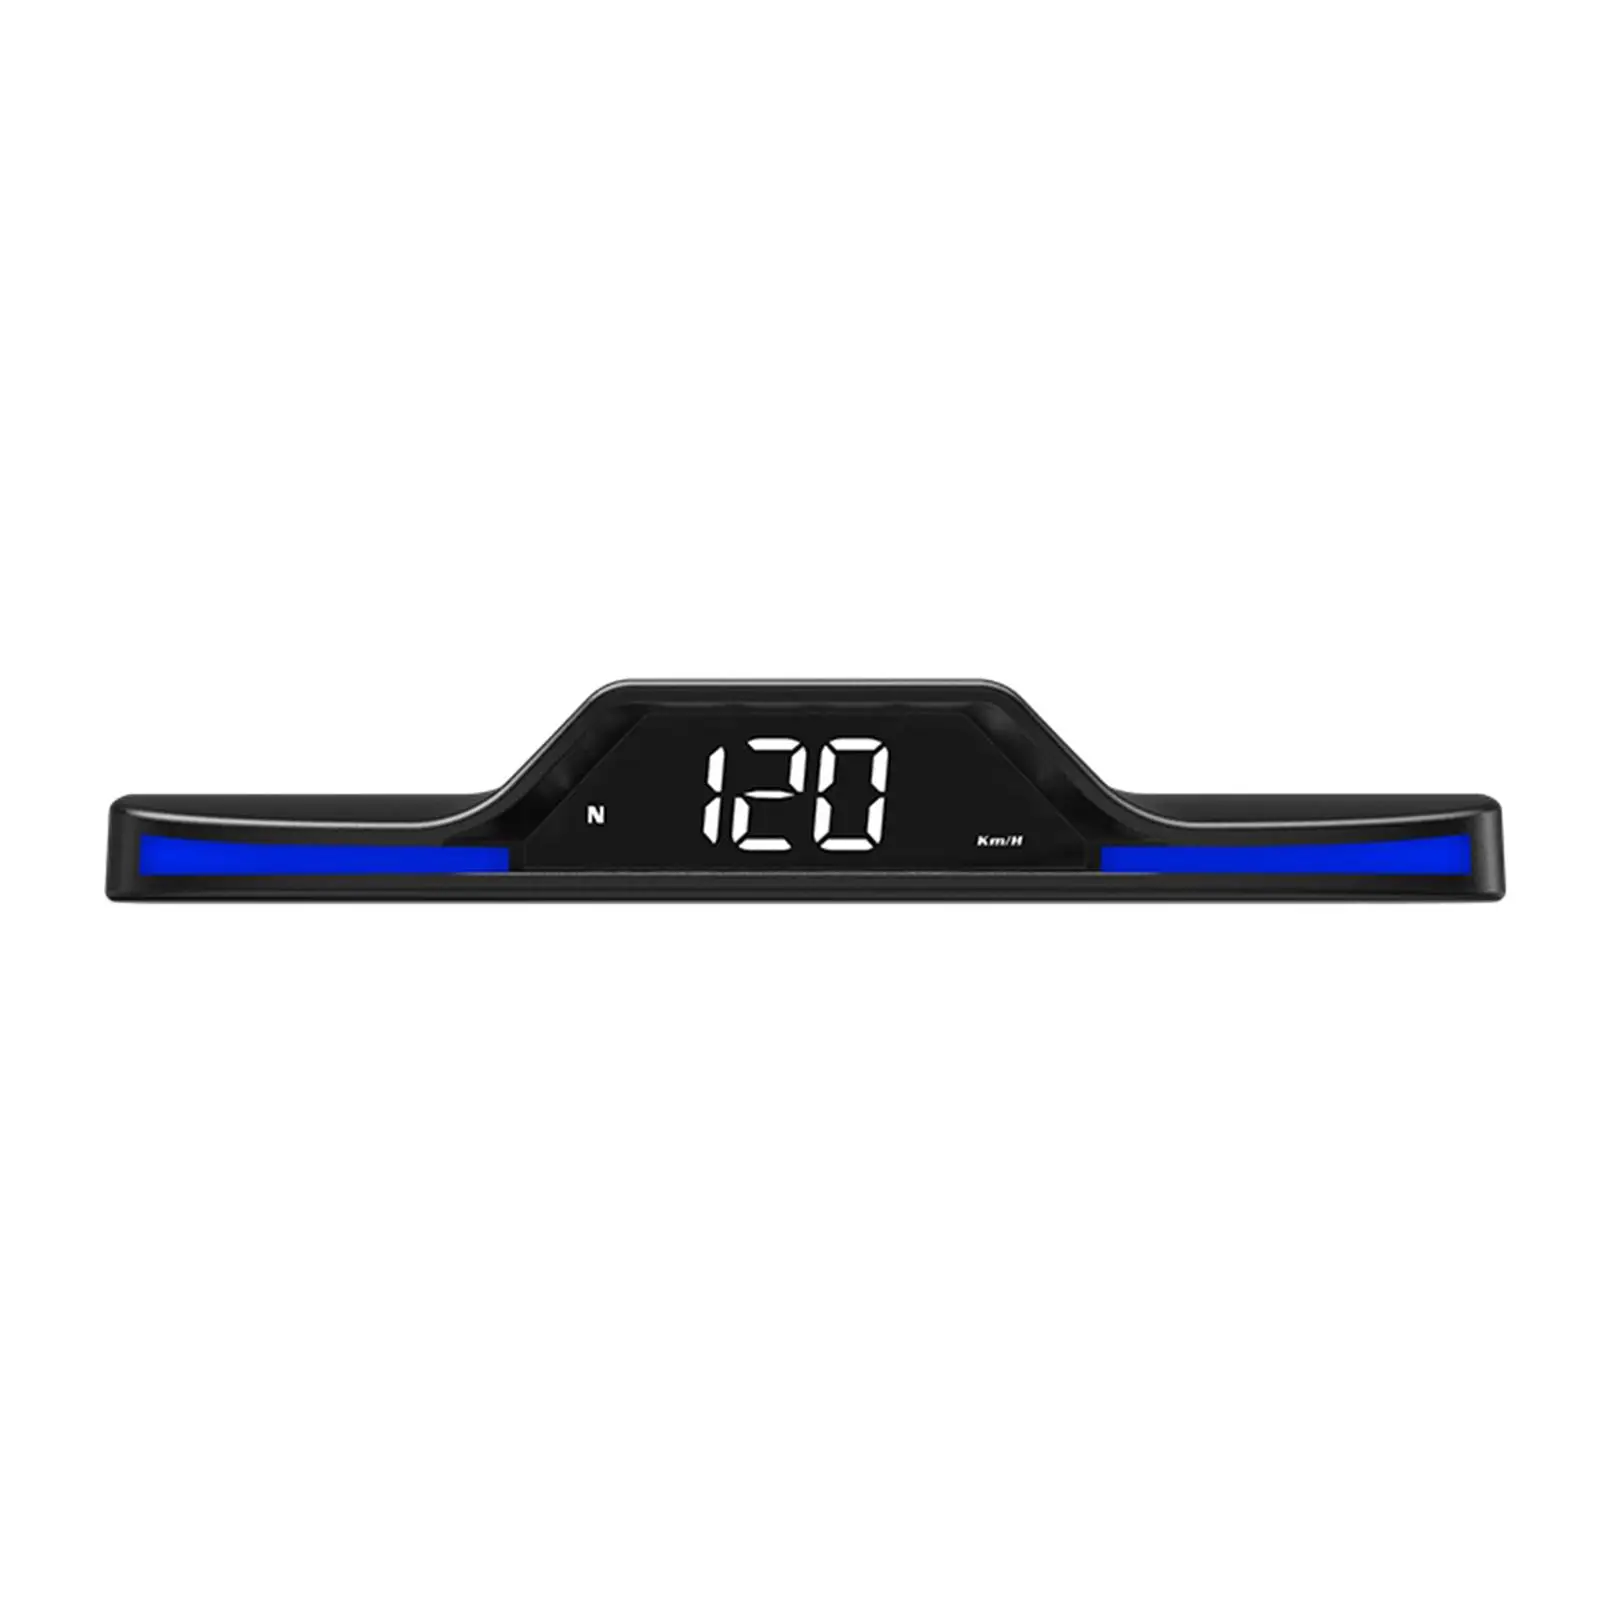 G15 Easy Installation High Performance Modern Time Auto Head up Display Digital Gauge for Vehicles Cars All Car Suvs Trucks